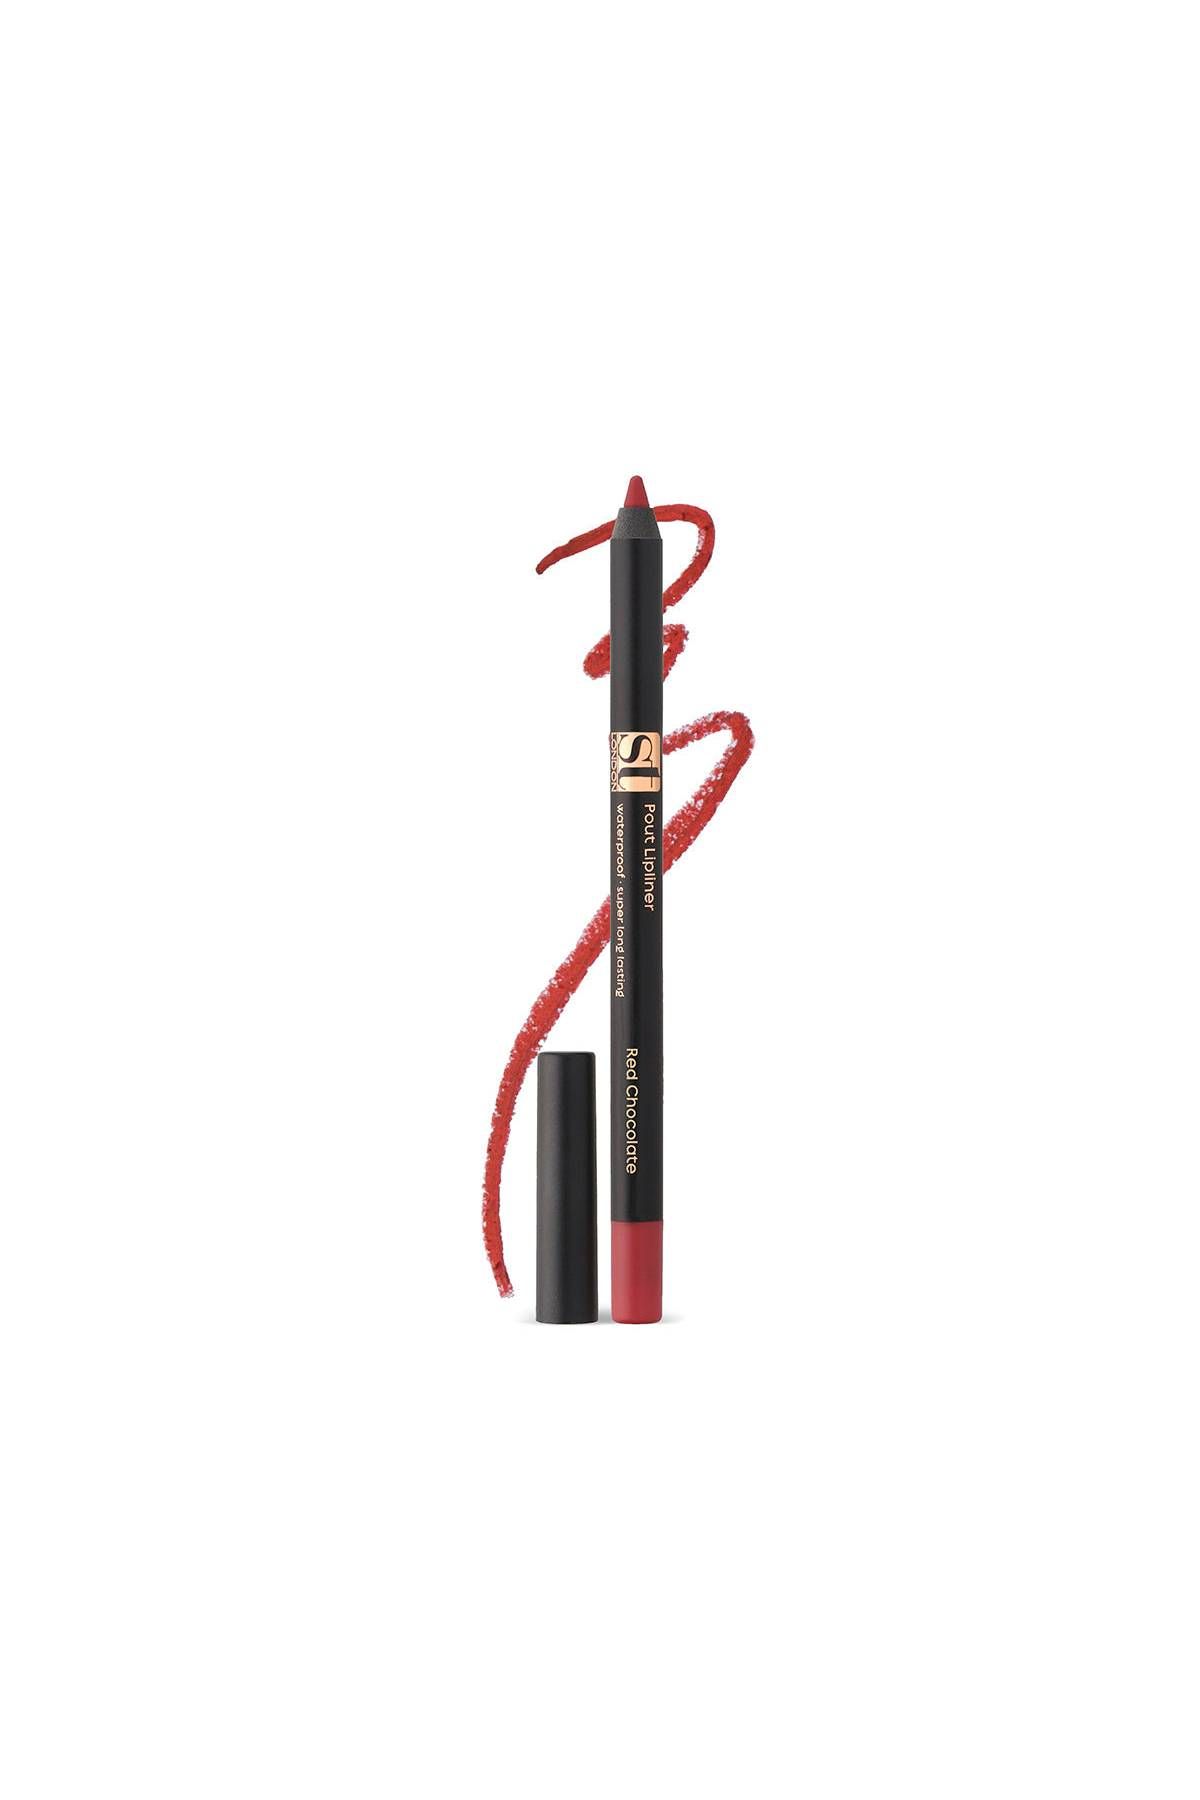 ST London - Pout Lipliner - Red Chocolate